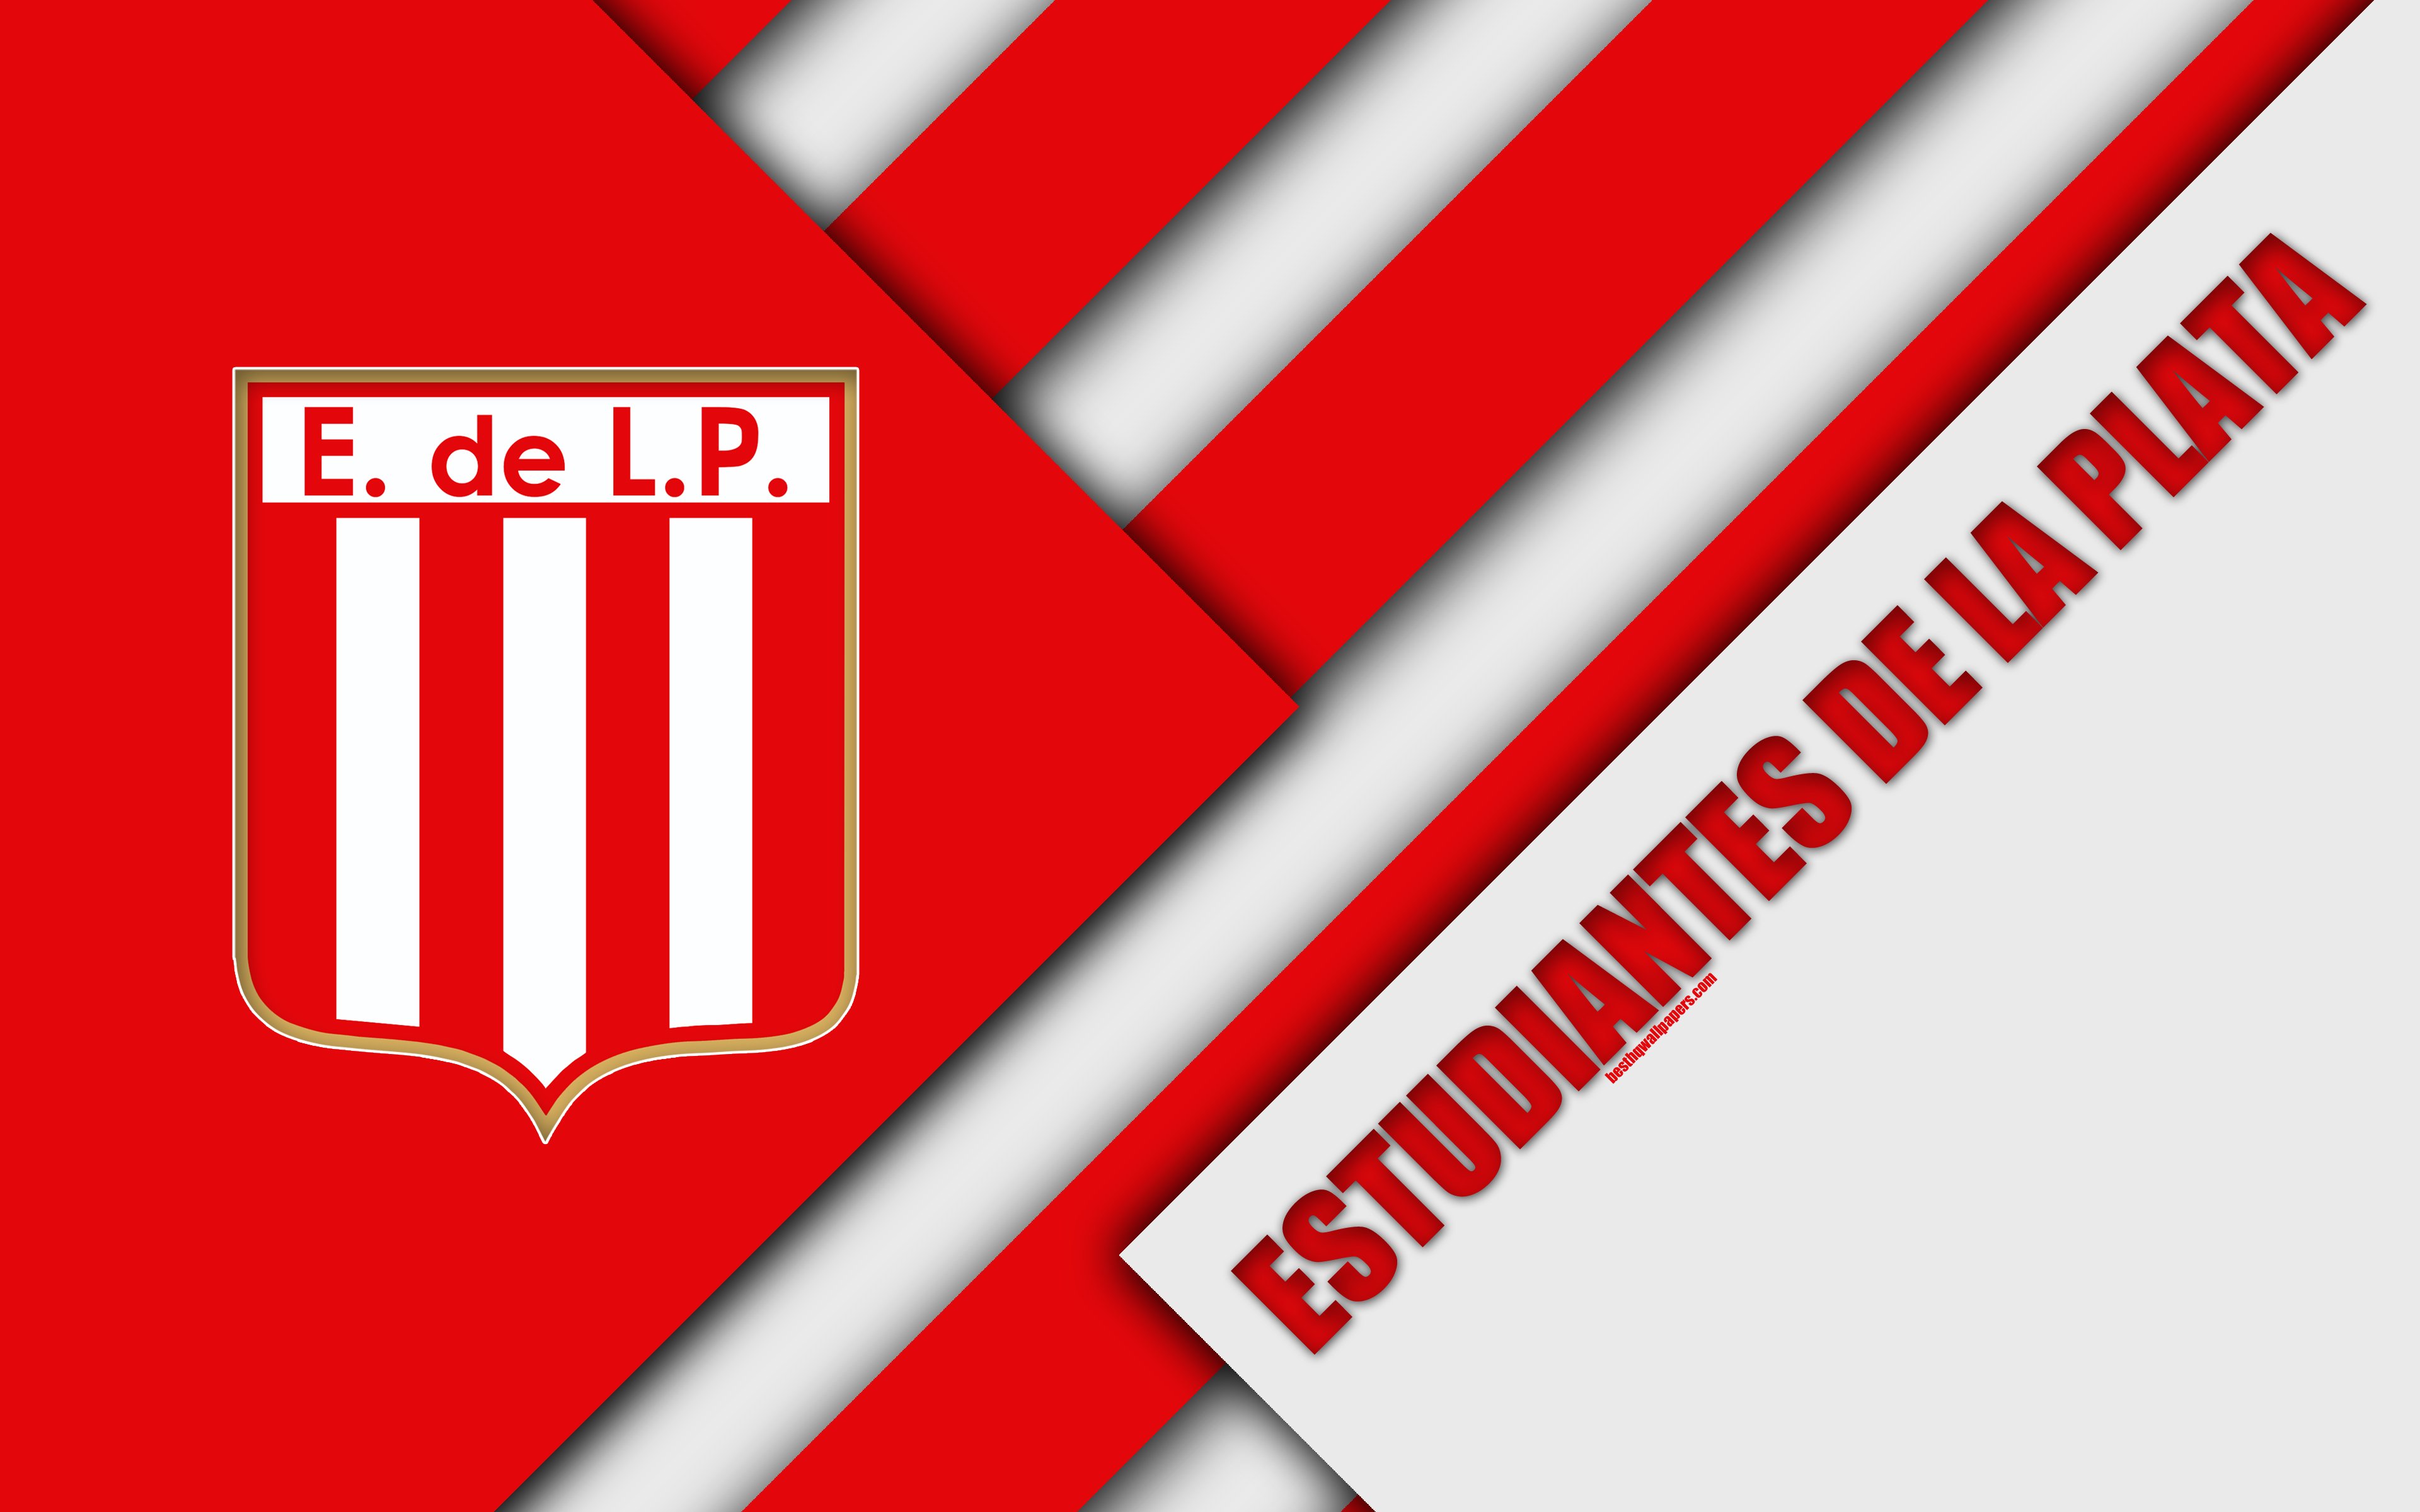 Download wallpaper Estudiantes de La Plata, Argentine football club, 4k, material design, white red abstraction, La Plata, Argentina, football, Argentine Superleague, First Division for desktop with resolution 3840x2400. High Quality HD picture